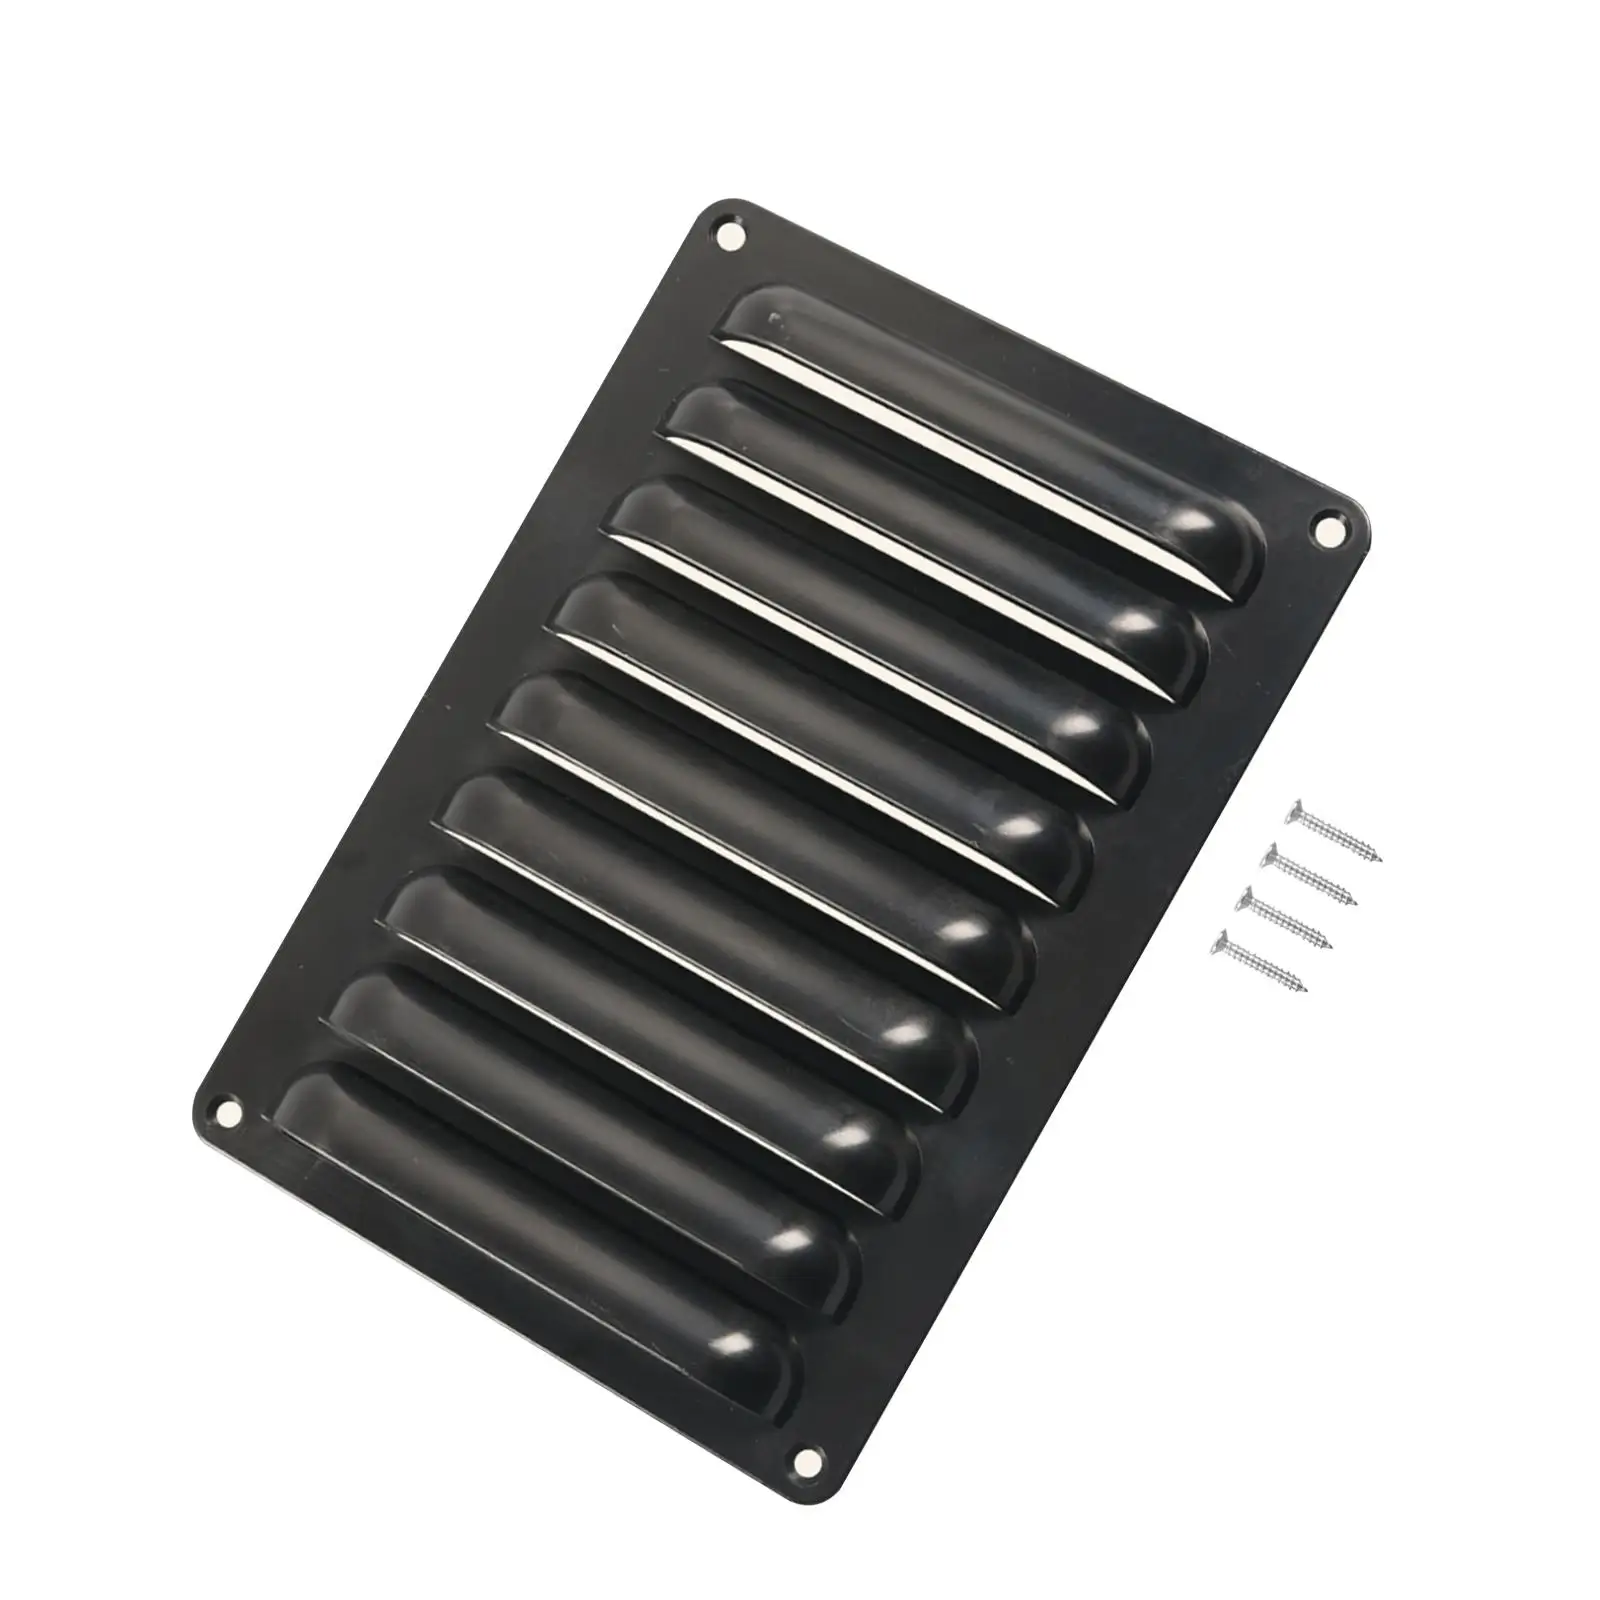 Air Vent Grille Accessories Replacement Part Cover Tool with Screws Black Supply for Motorhome Camping Camper Traveling